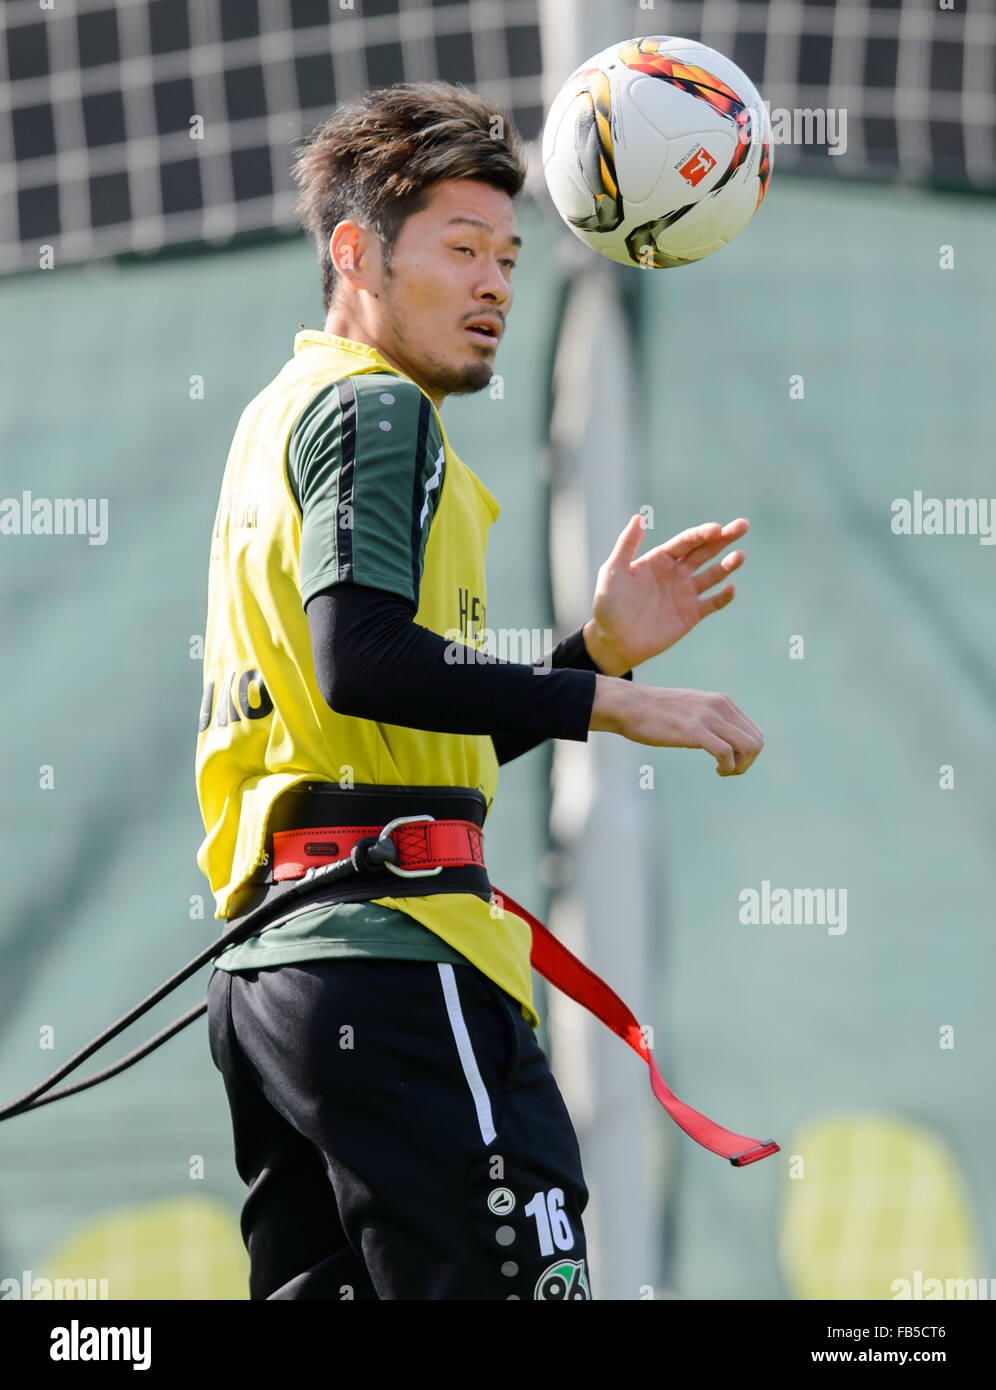 Belek, Turkey. 10th Jan, 2016. Hannover's new signing Hotaru Yamaguchi in action during a training session of German Bundesliga soccer club Hannover 96 in Belek, Turkey, 10 January 2016. Hannover 96 is in Belek to prepare for the second half of the German Bundesliga season. Photo: THOMAS EISENHUTH/dpa/Alamy Live News Stock Photo